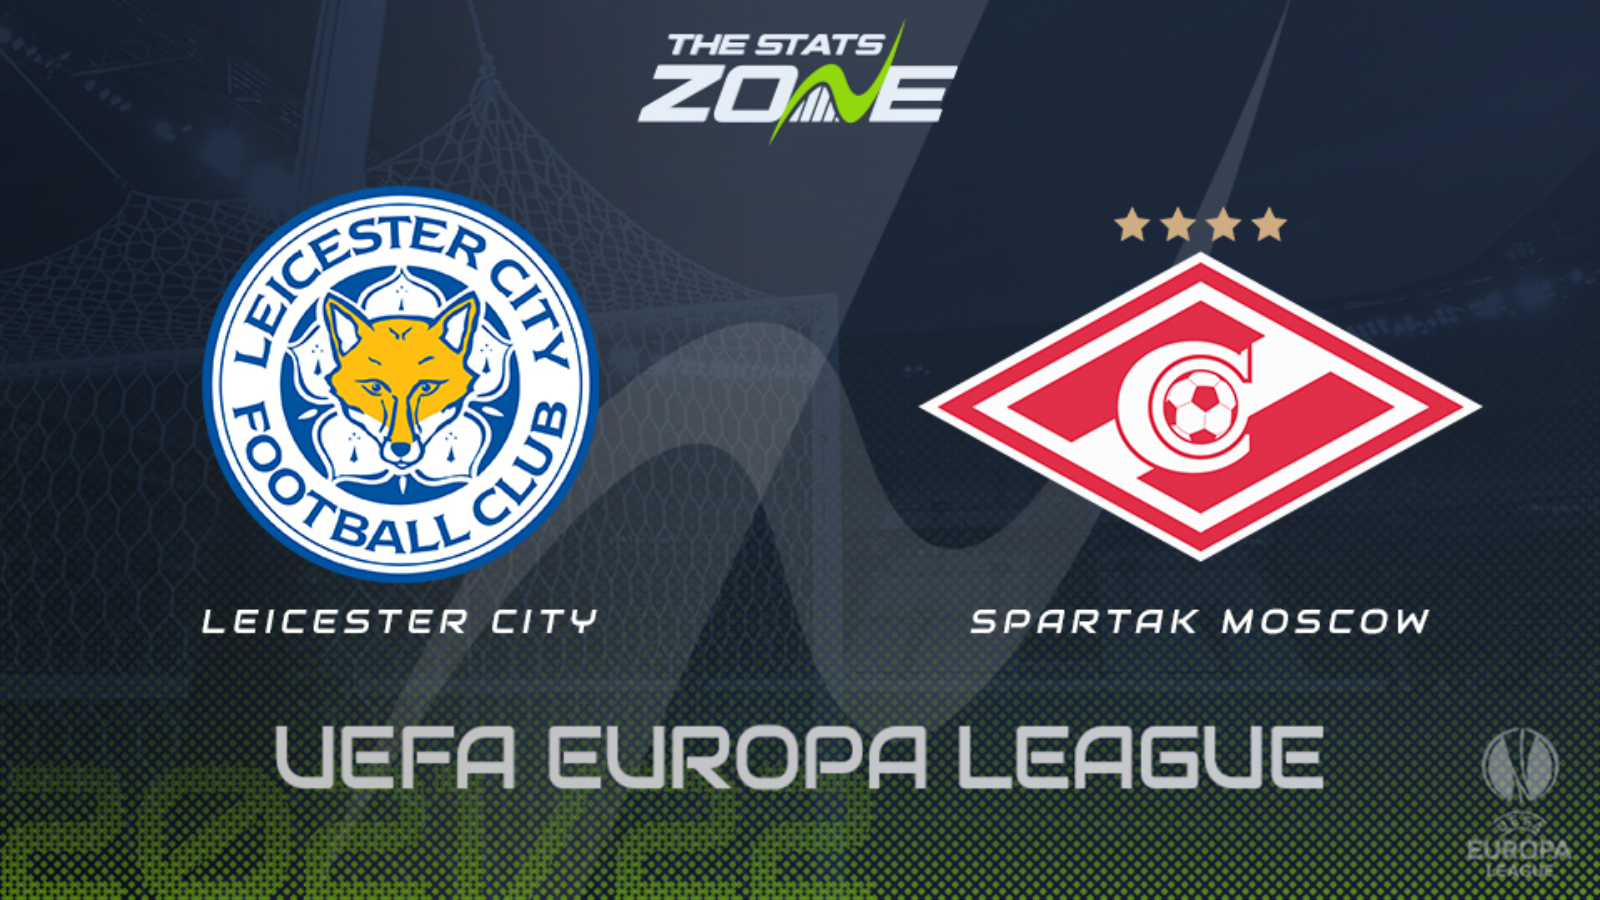 Spartak moscow vs leicester city